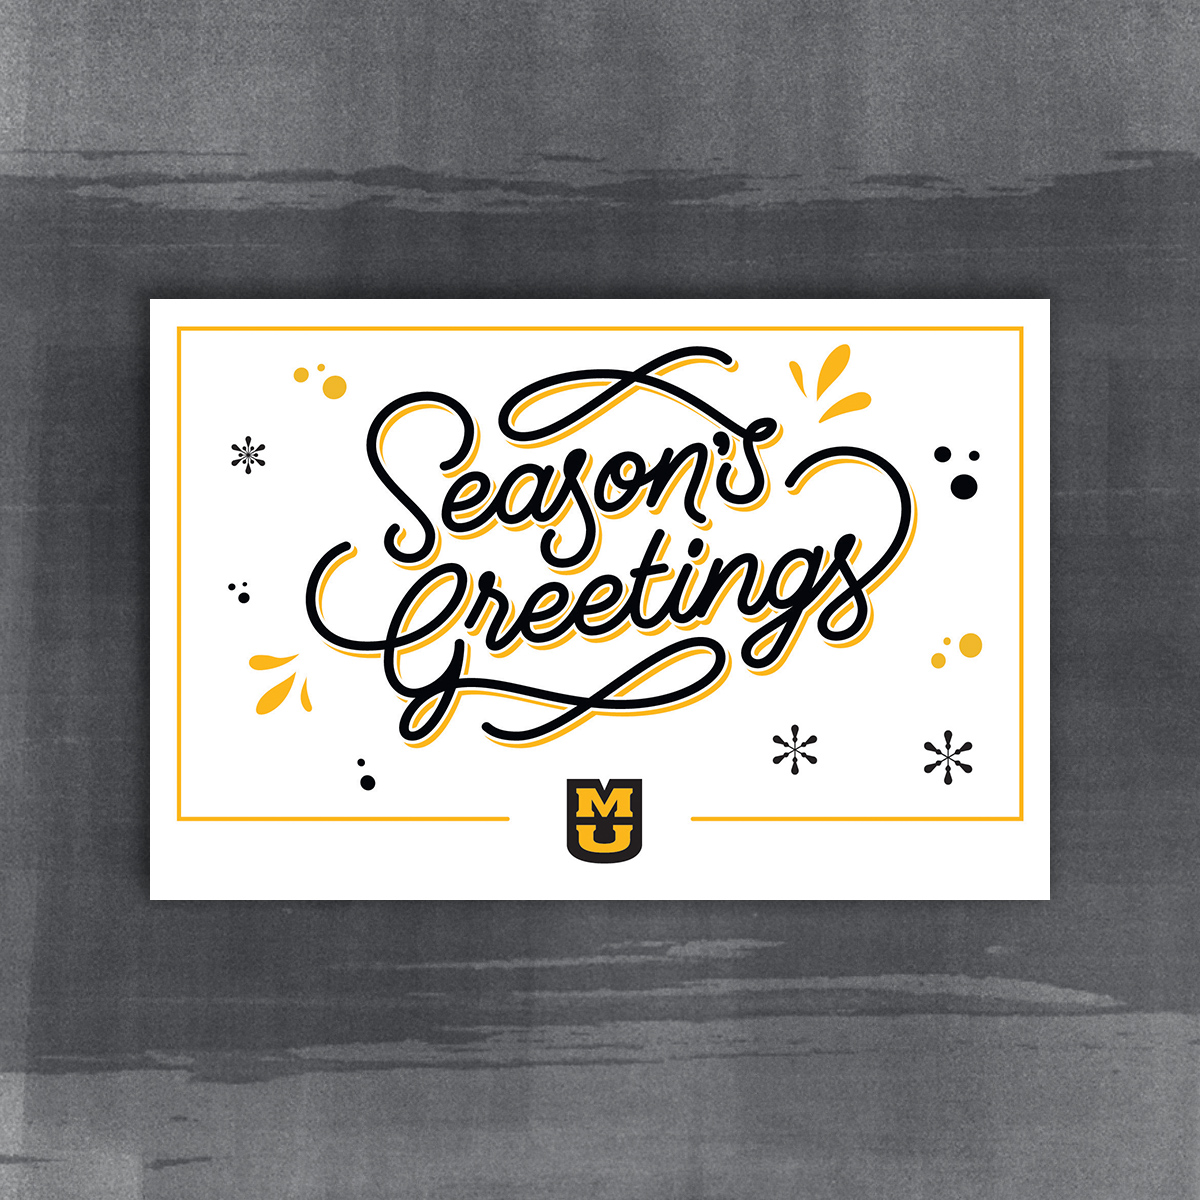 Seasons Greeting Card with Mizzou gold and black elements